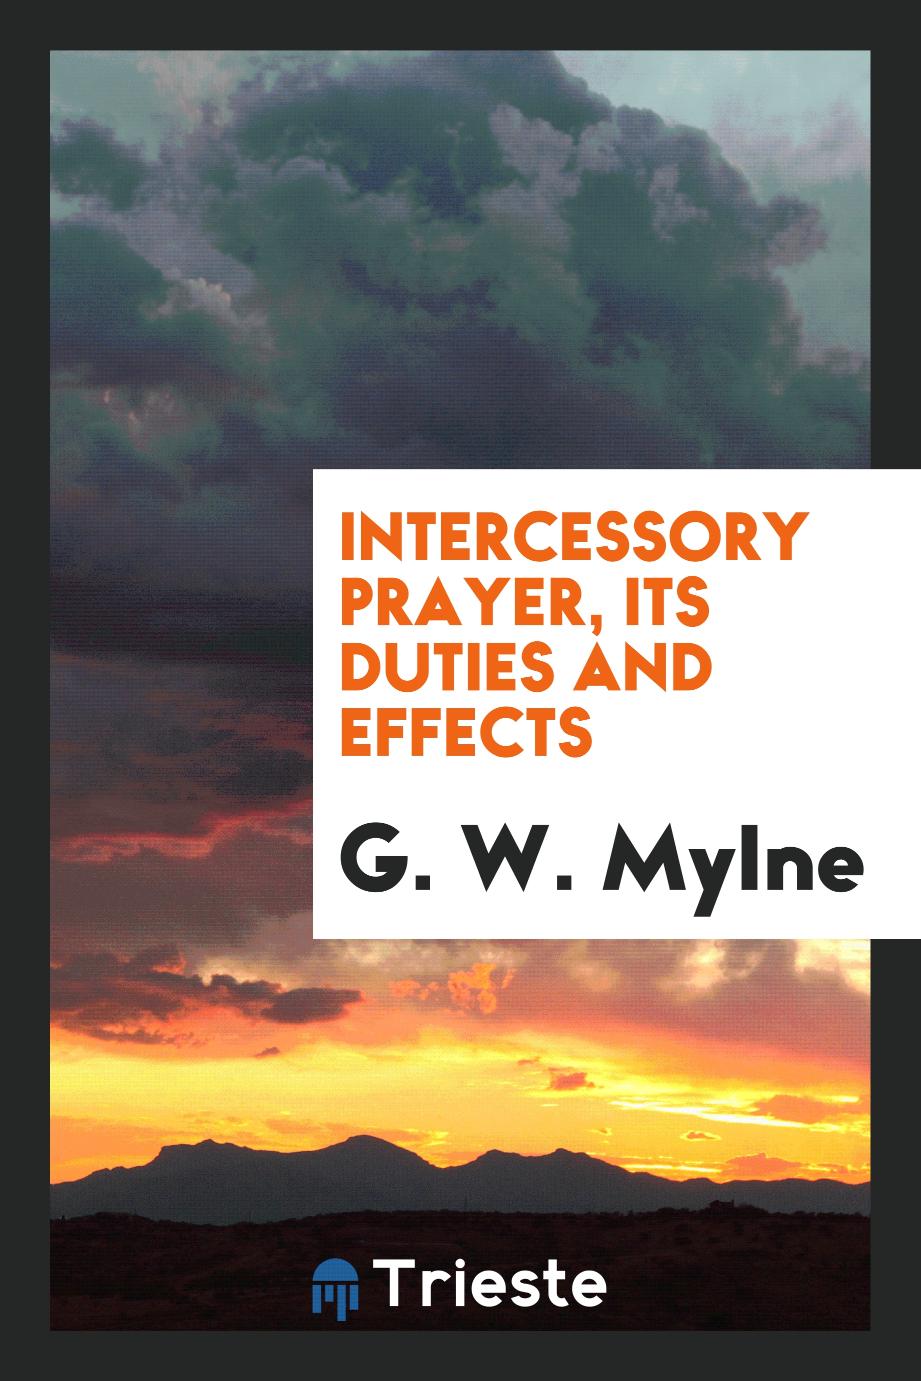 Intercessory Prayer, Its Duties and Effects